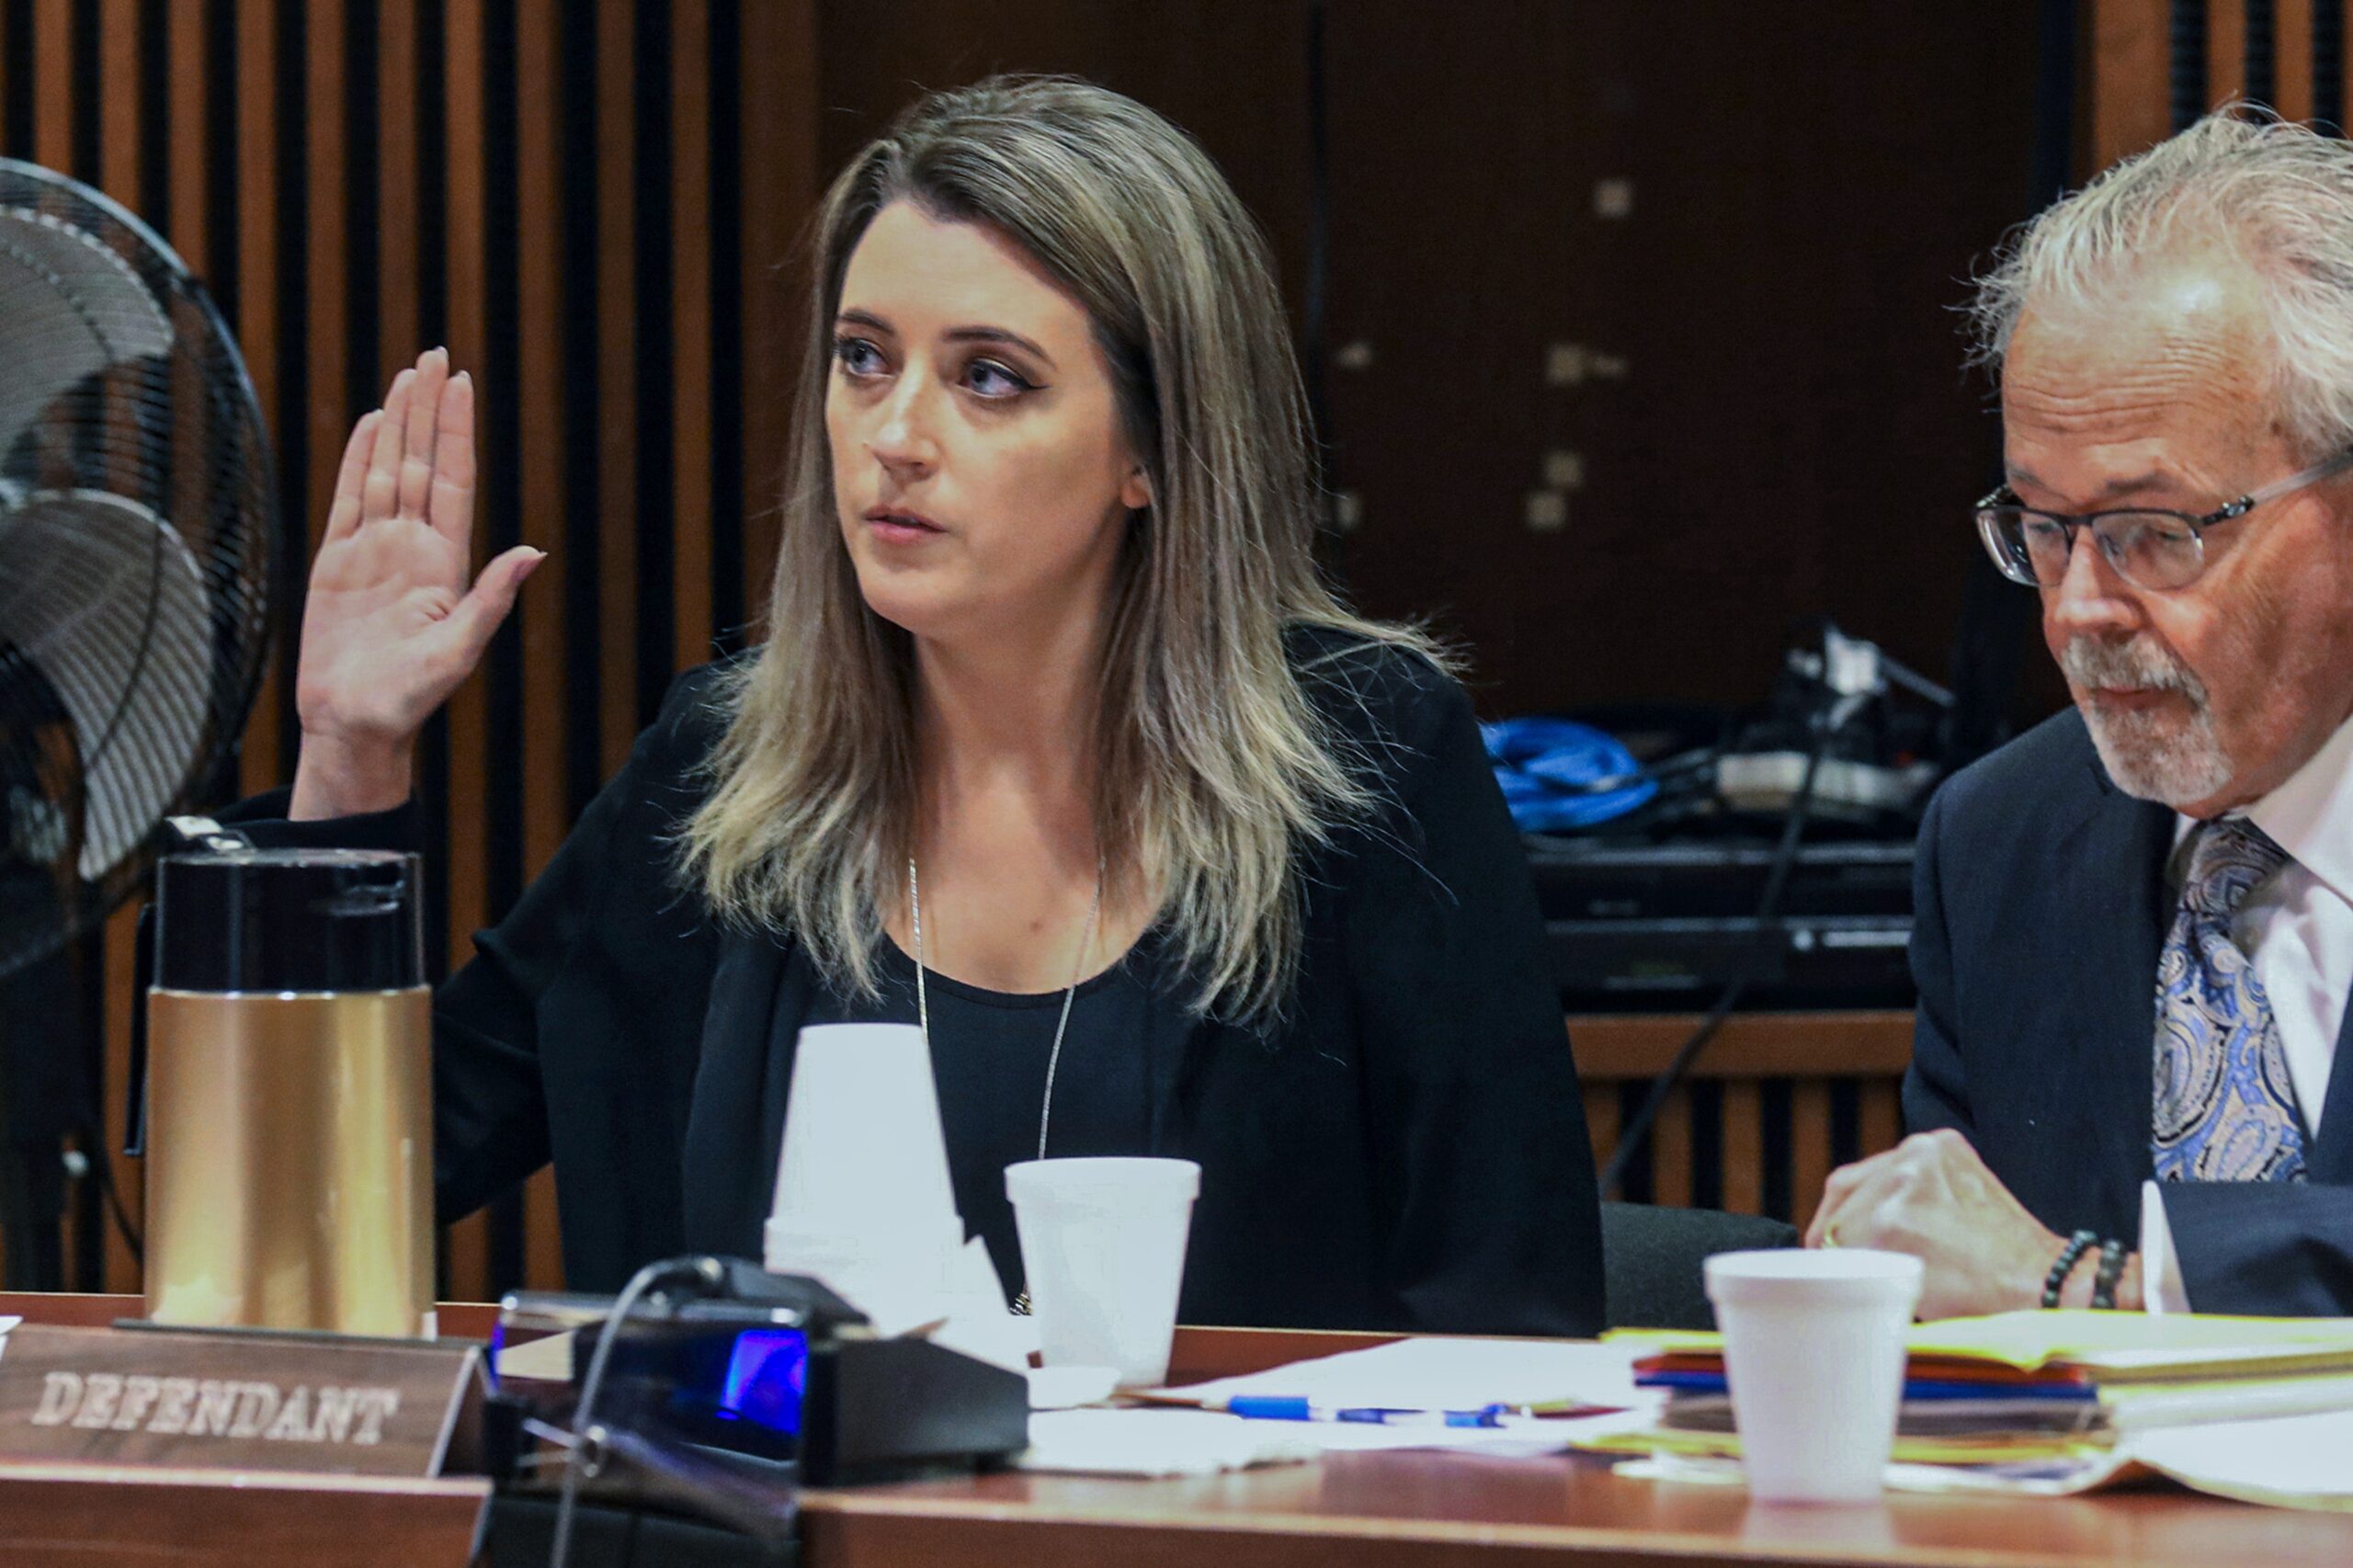 Kate McClure, 32, charged with theft by deception in the $400,00 GoFundMe scam, with her lawyer Jim Gerrow Jr., in State Superior Court, Burlington County Courthouse, Mt. Holly, N.J., April 15, 2019. A New Jersey judge sentenced McClure to a term of one year and one day in prison, for her role in the scam using a fake story about Johnny Bobbitt who was a homeless veteran. (David Swanson/The Philadelphia Inquirer via AP, fILE)